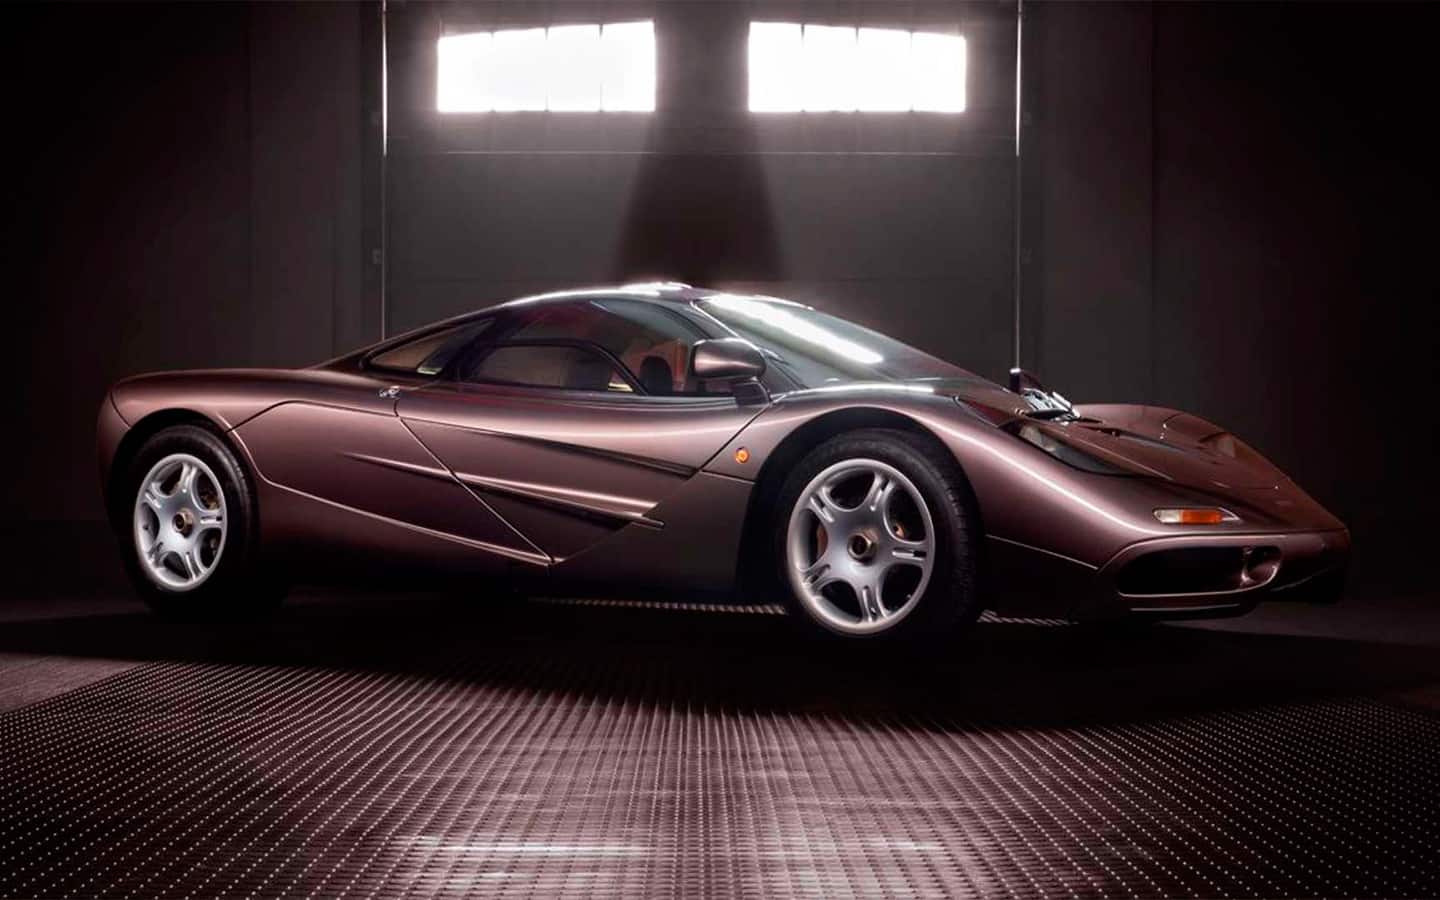 McLaren F1 with less than 400 km mileage sold at auction for $ 20 million